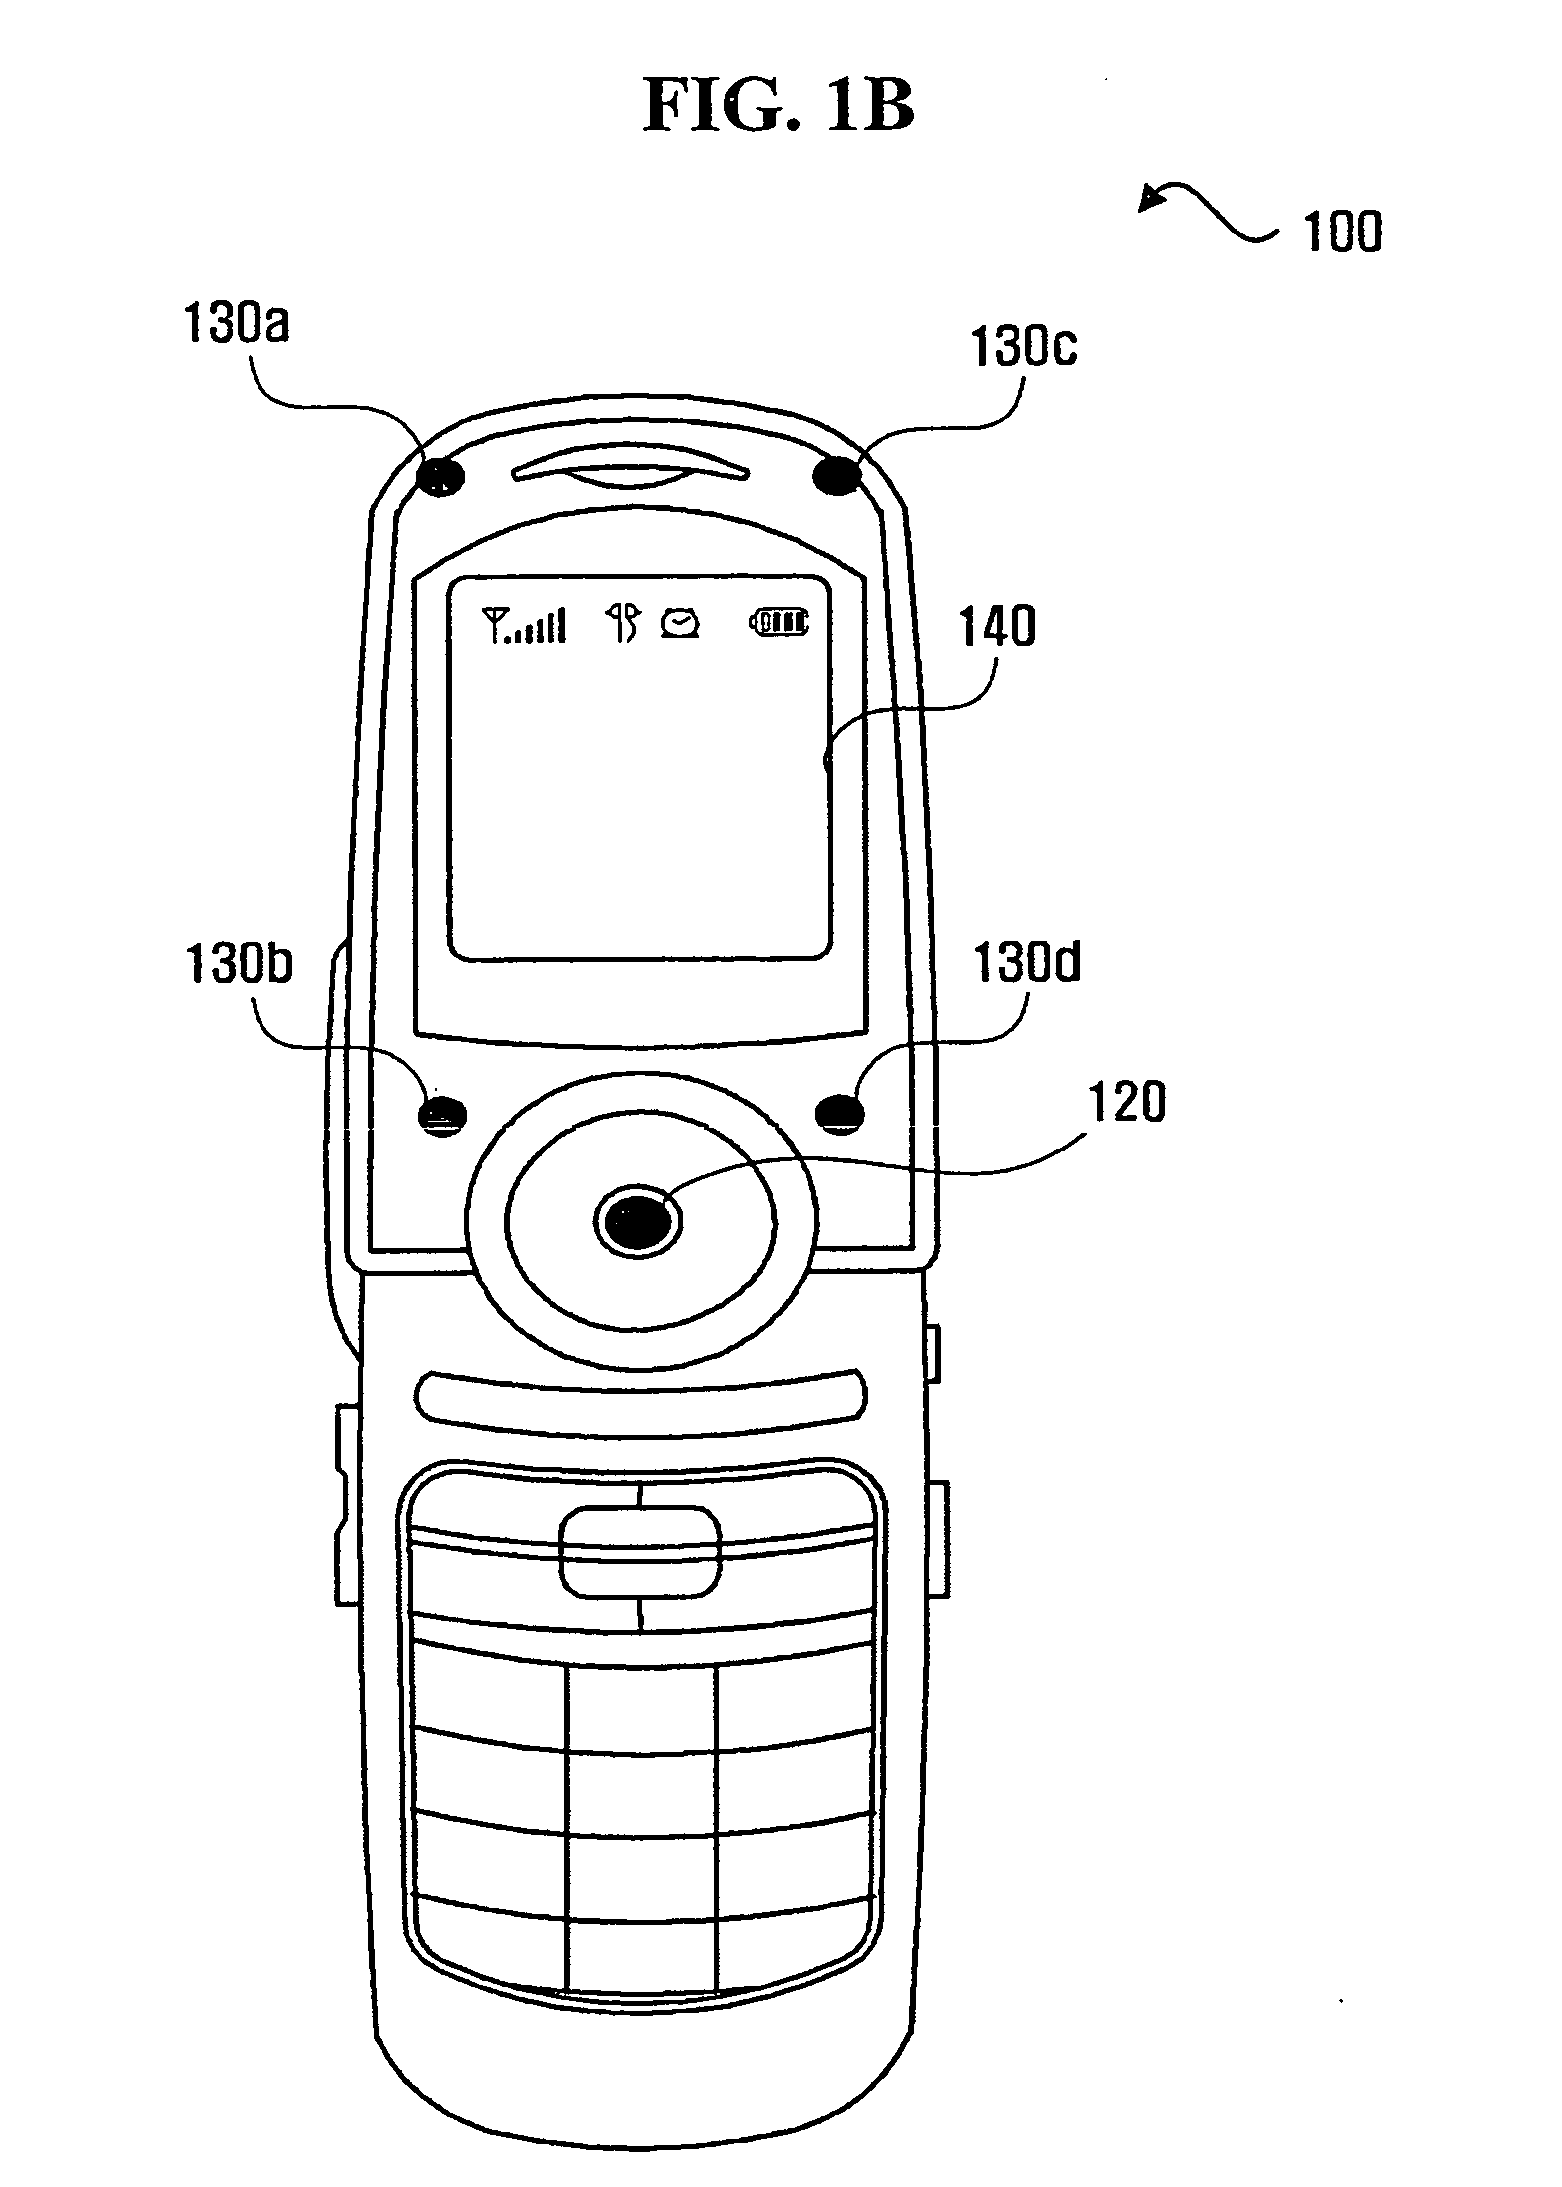 Augmented reality apparatus and method